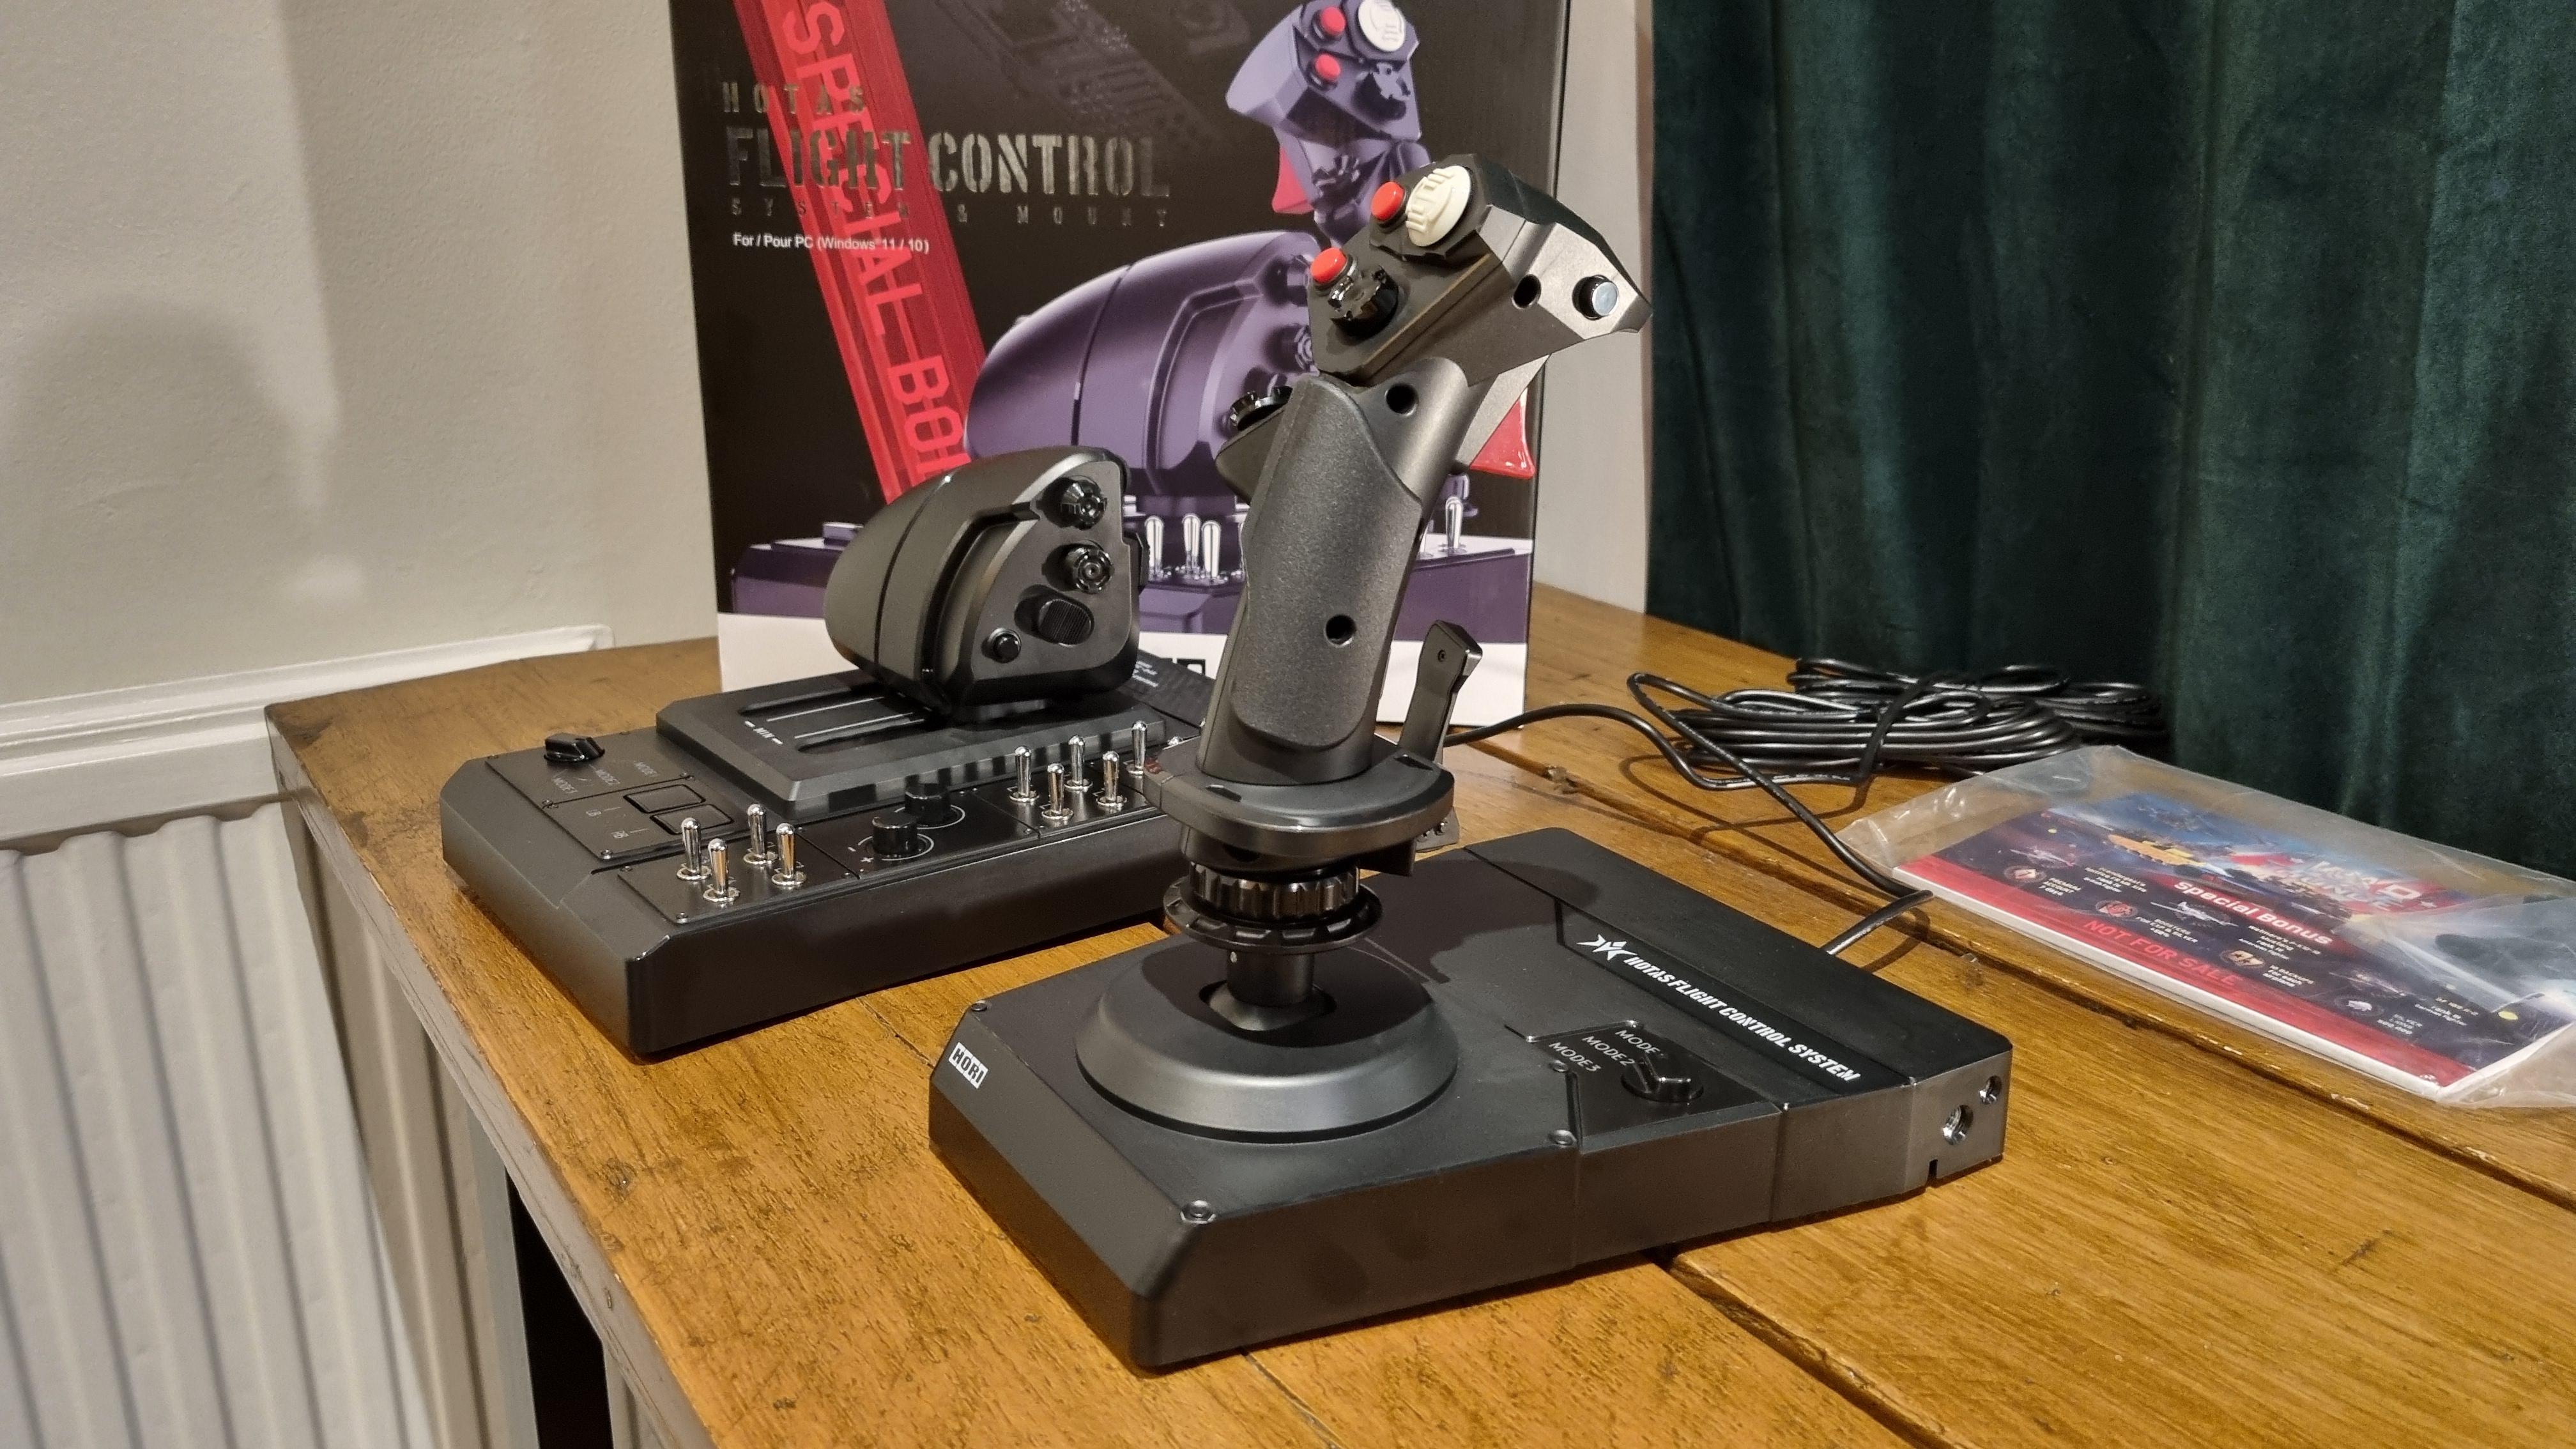 The Hori HOTAS flight control system in profile on a desk